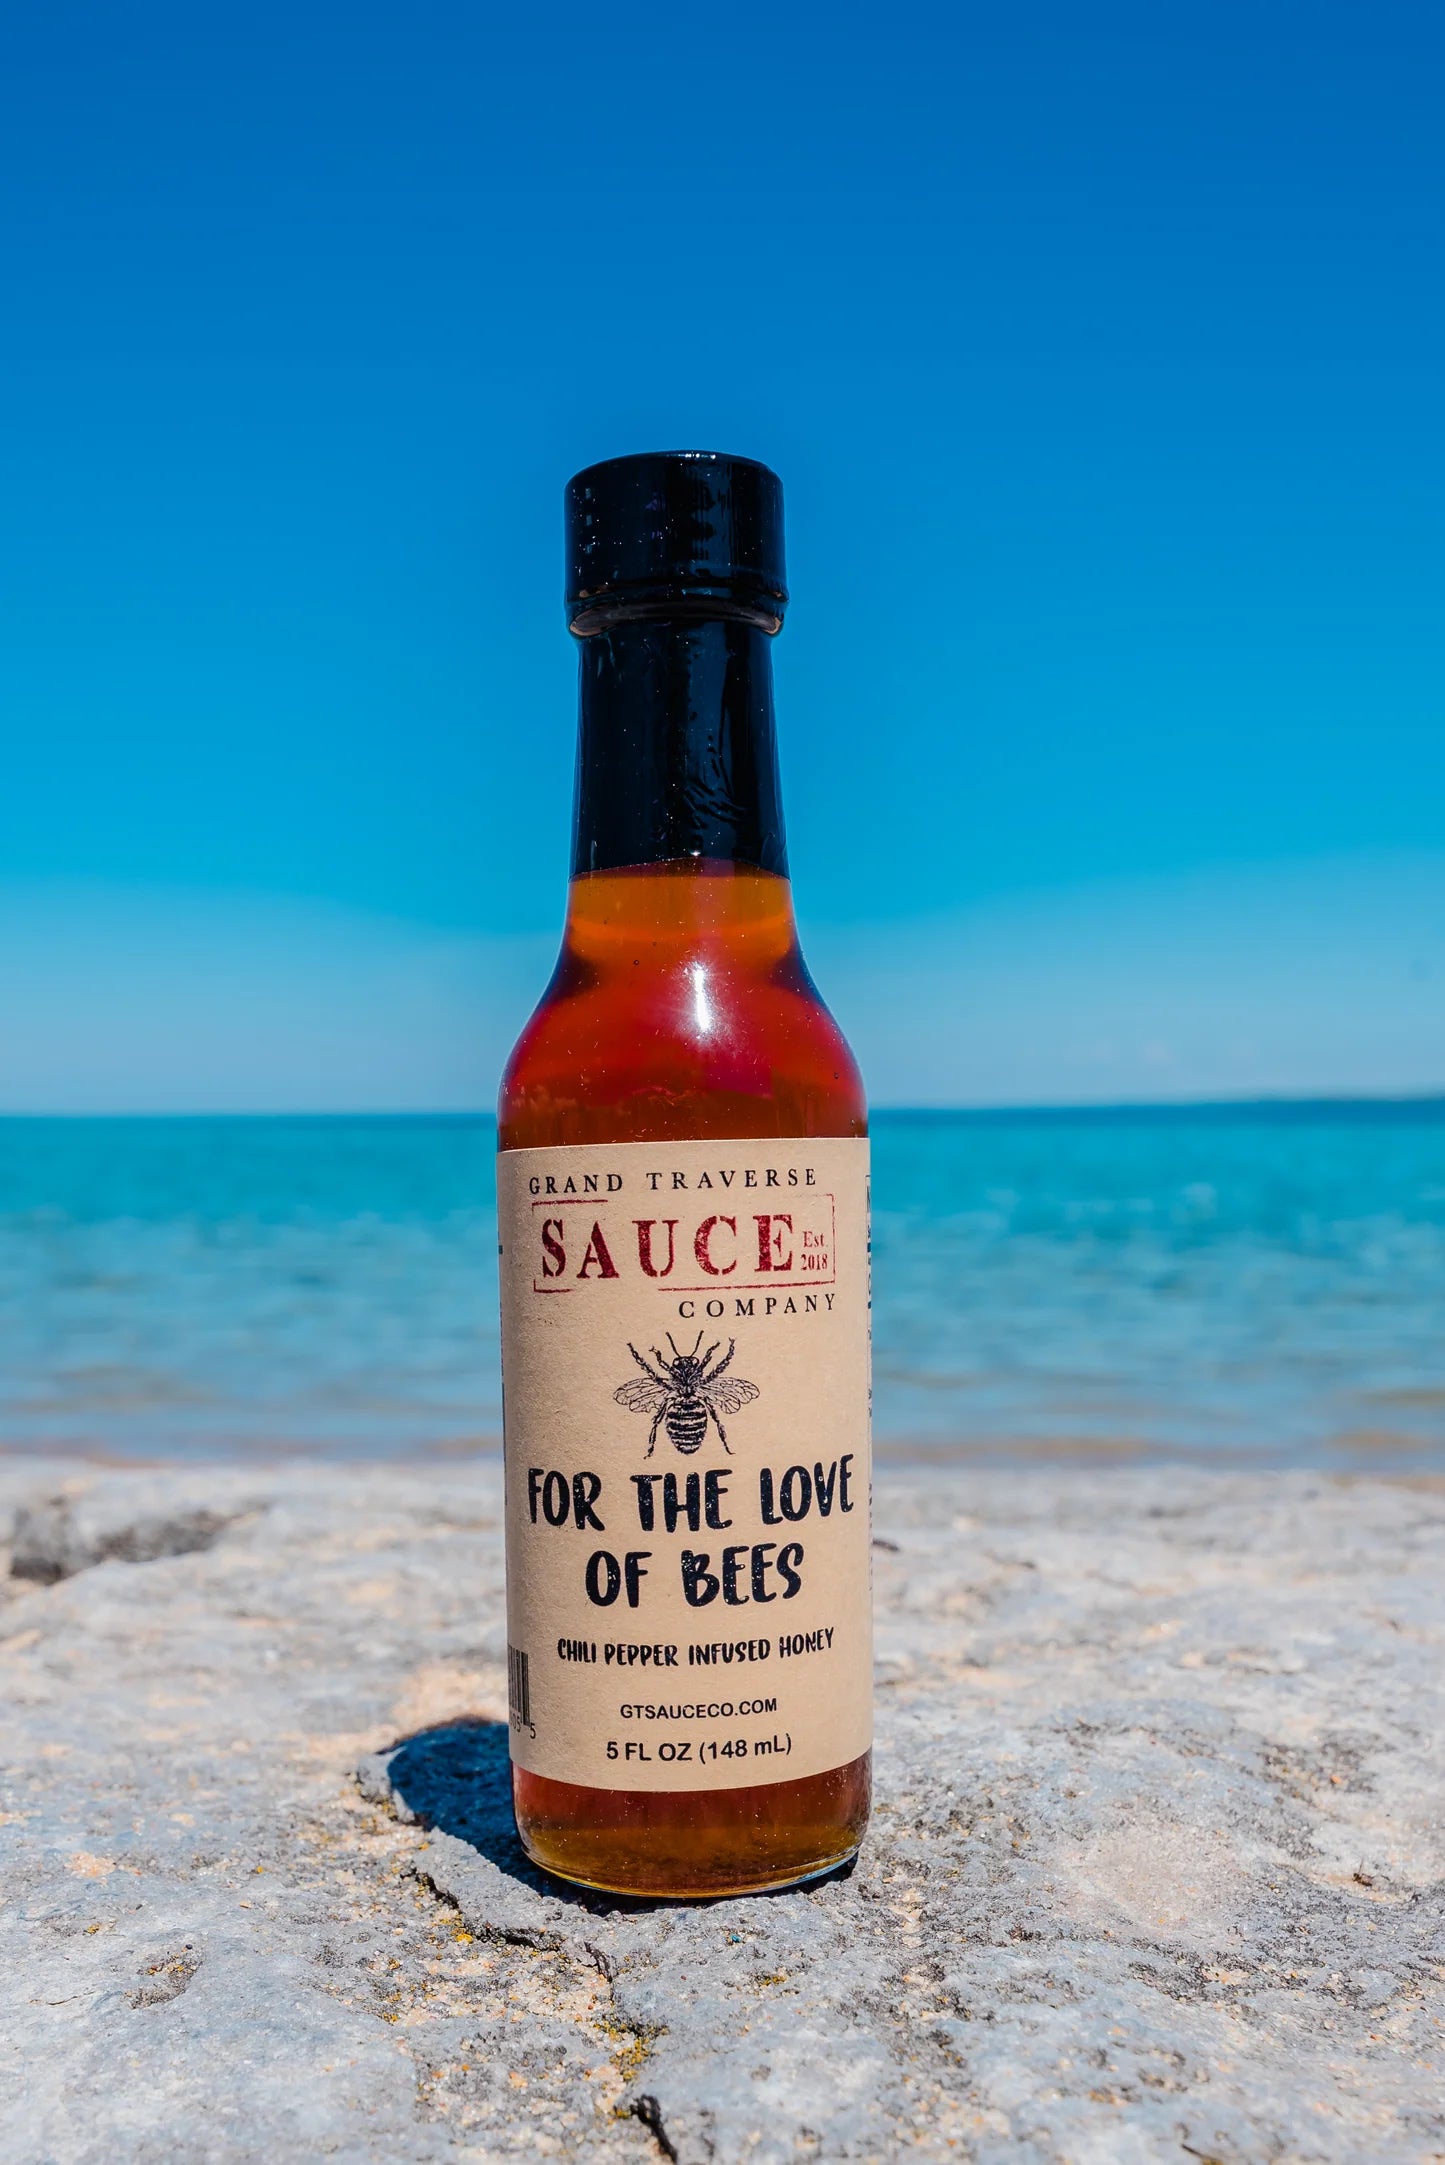 Grand Traverse Sauce - For The Love Of Bees